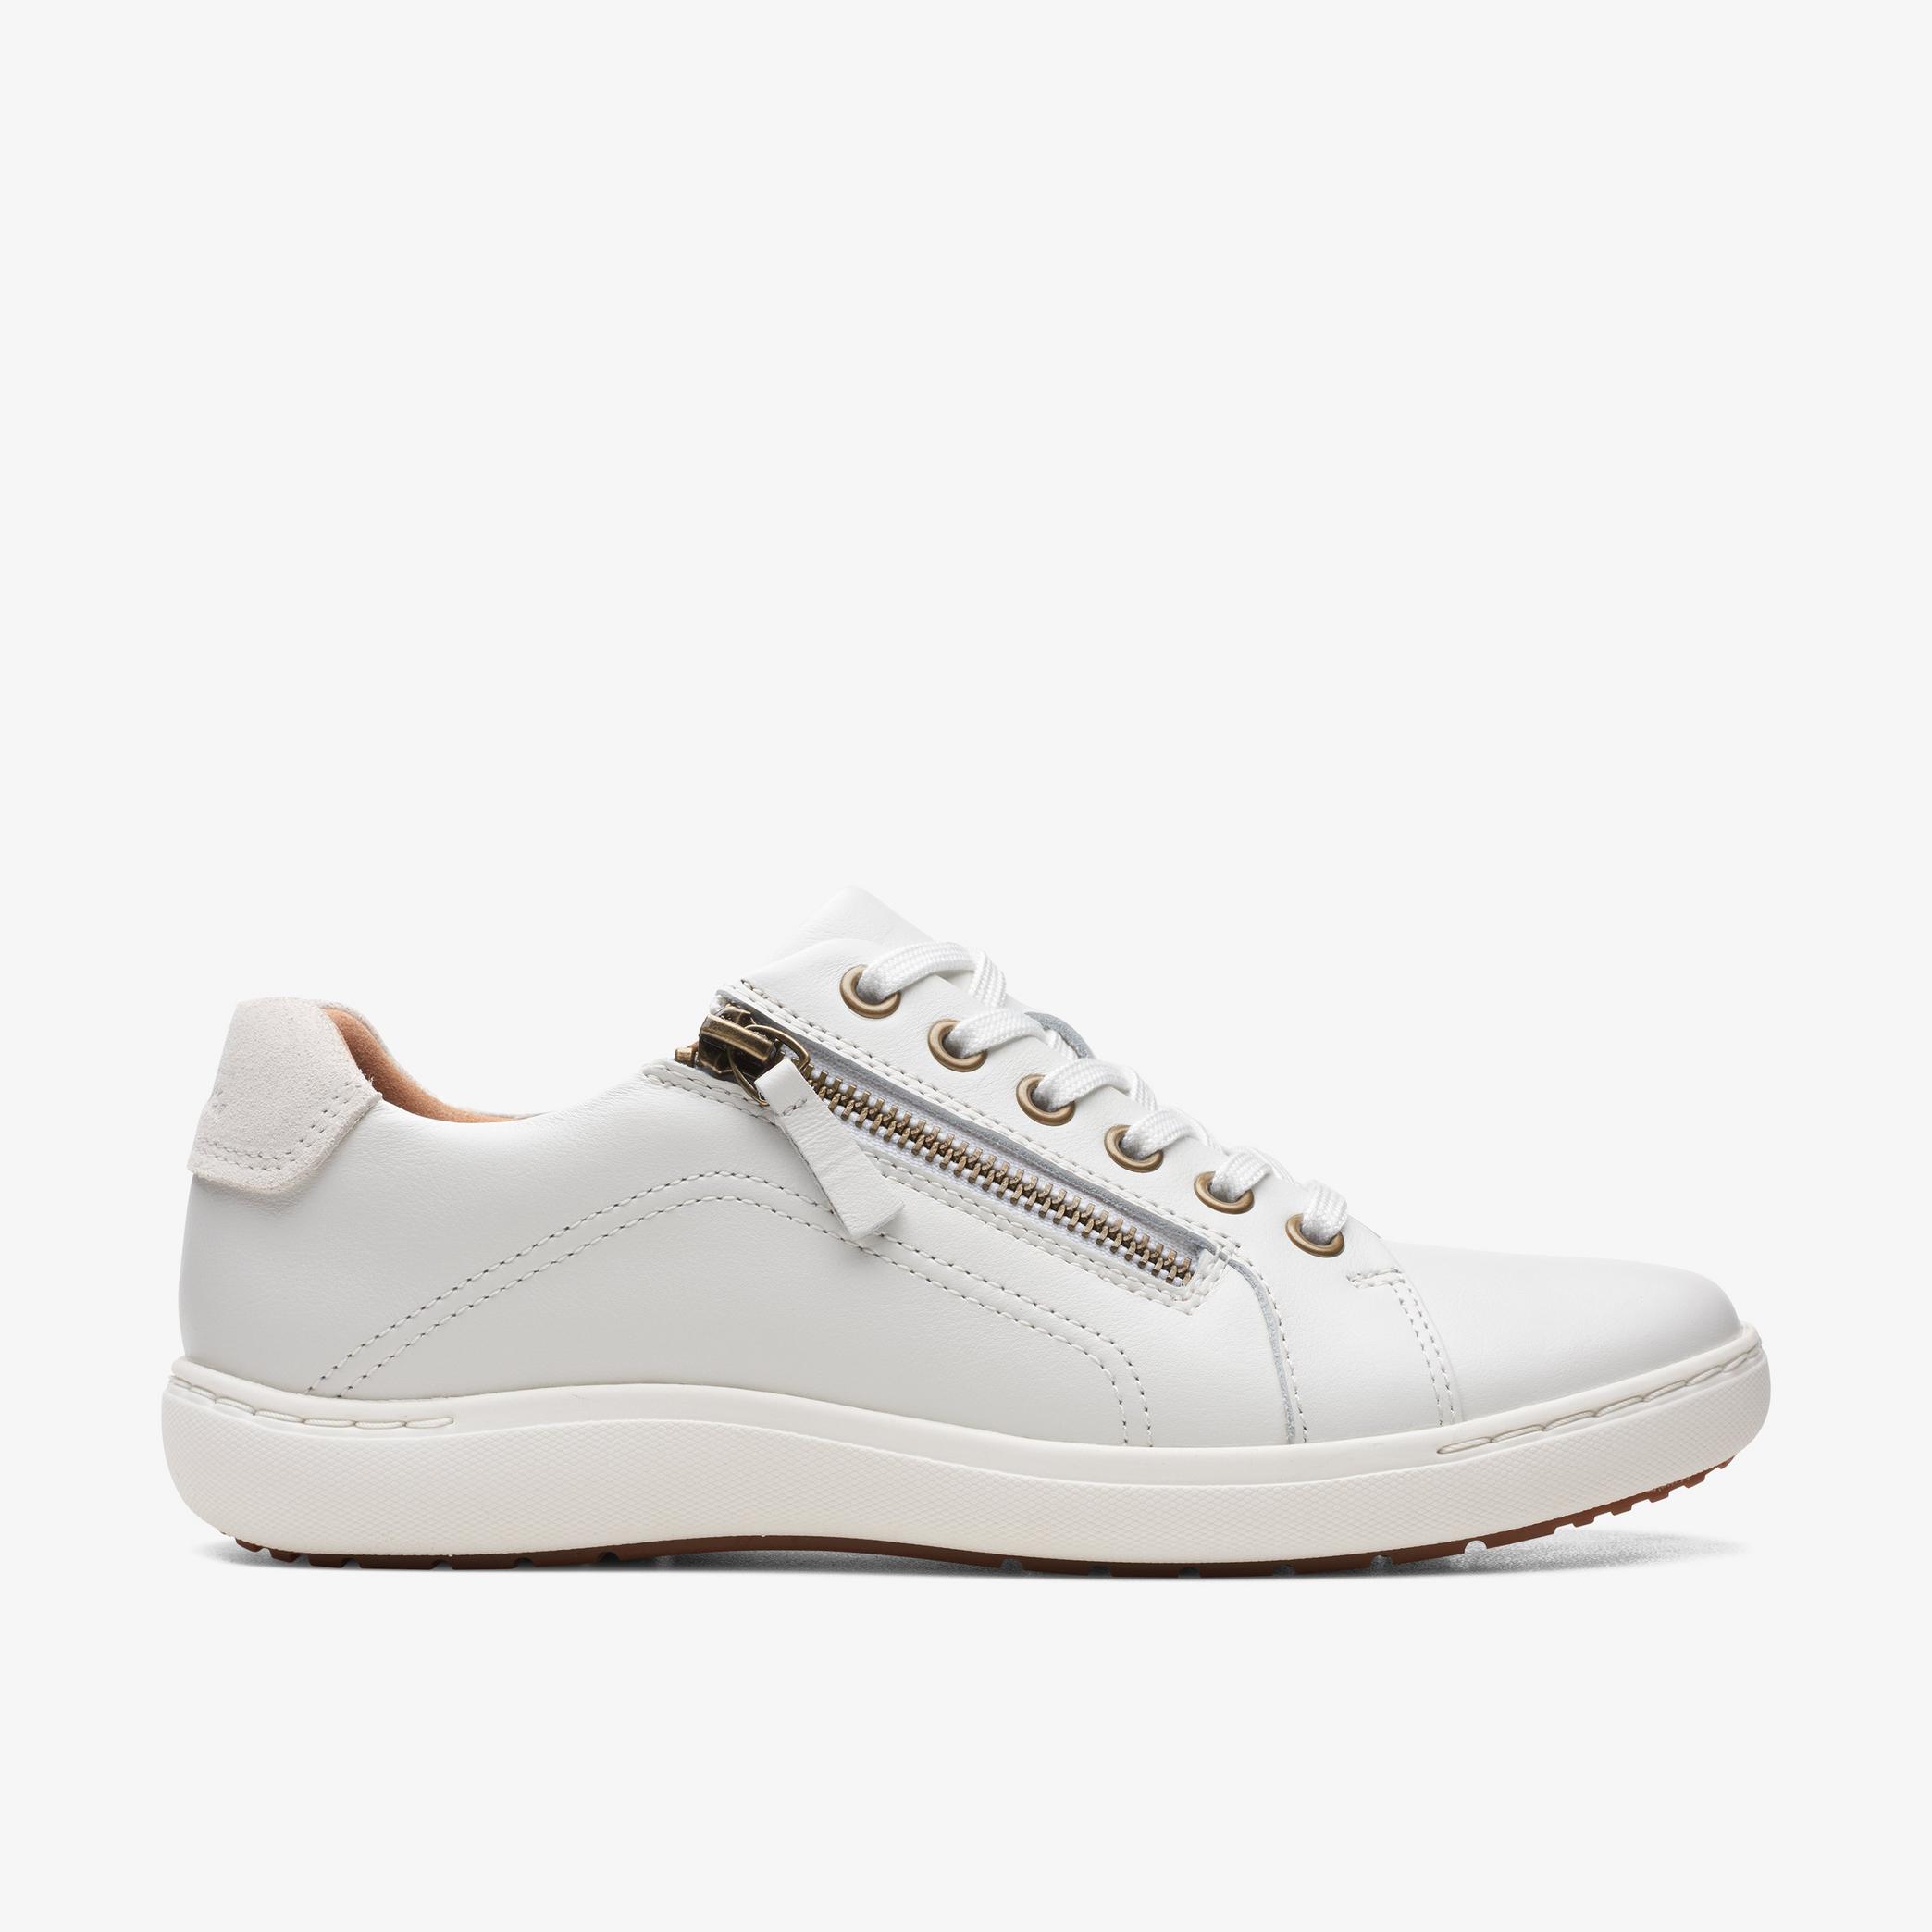 Nalle Lace White Leather Sneakers, view 1 of 6